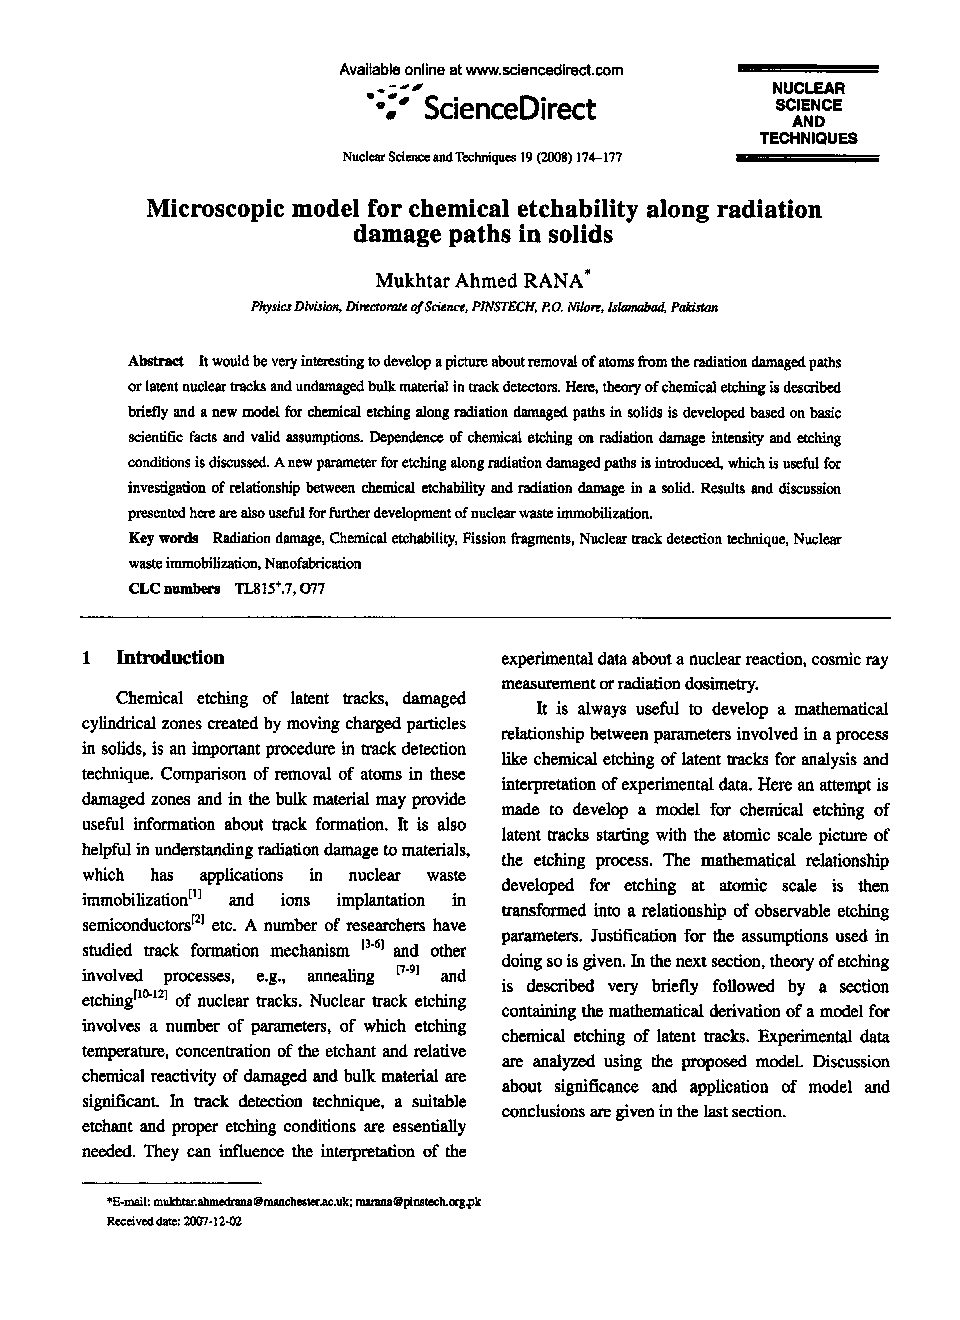 Microscopic model for chemical etchability along radiation damage paths in solids